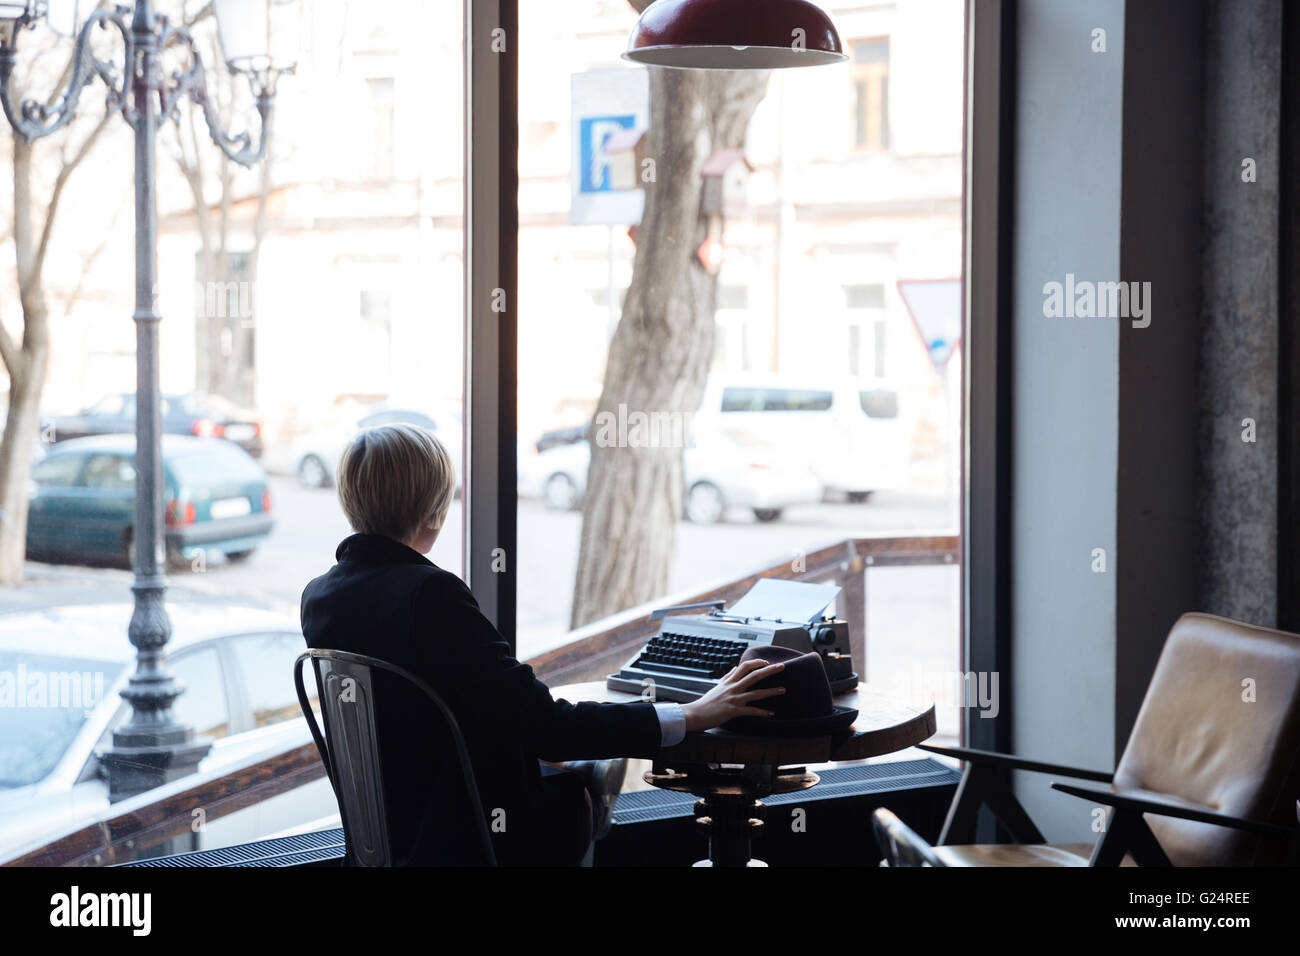 Blonde girl sitting backwards in a cafe and holding a hat Stock Photo